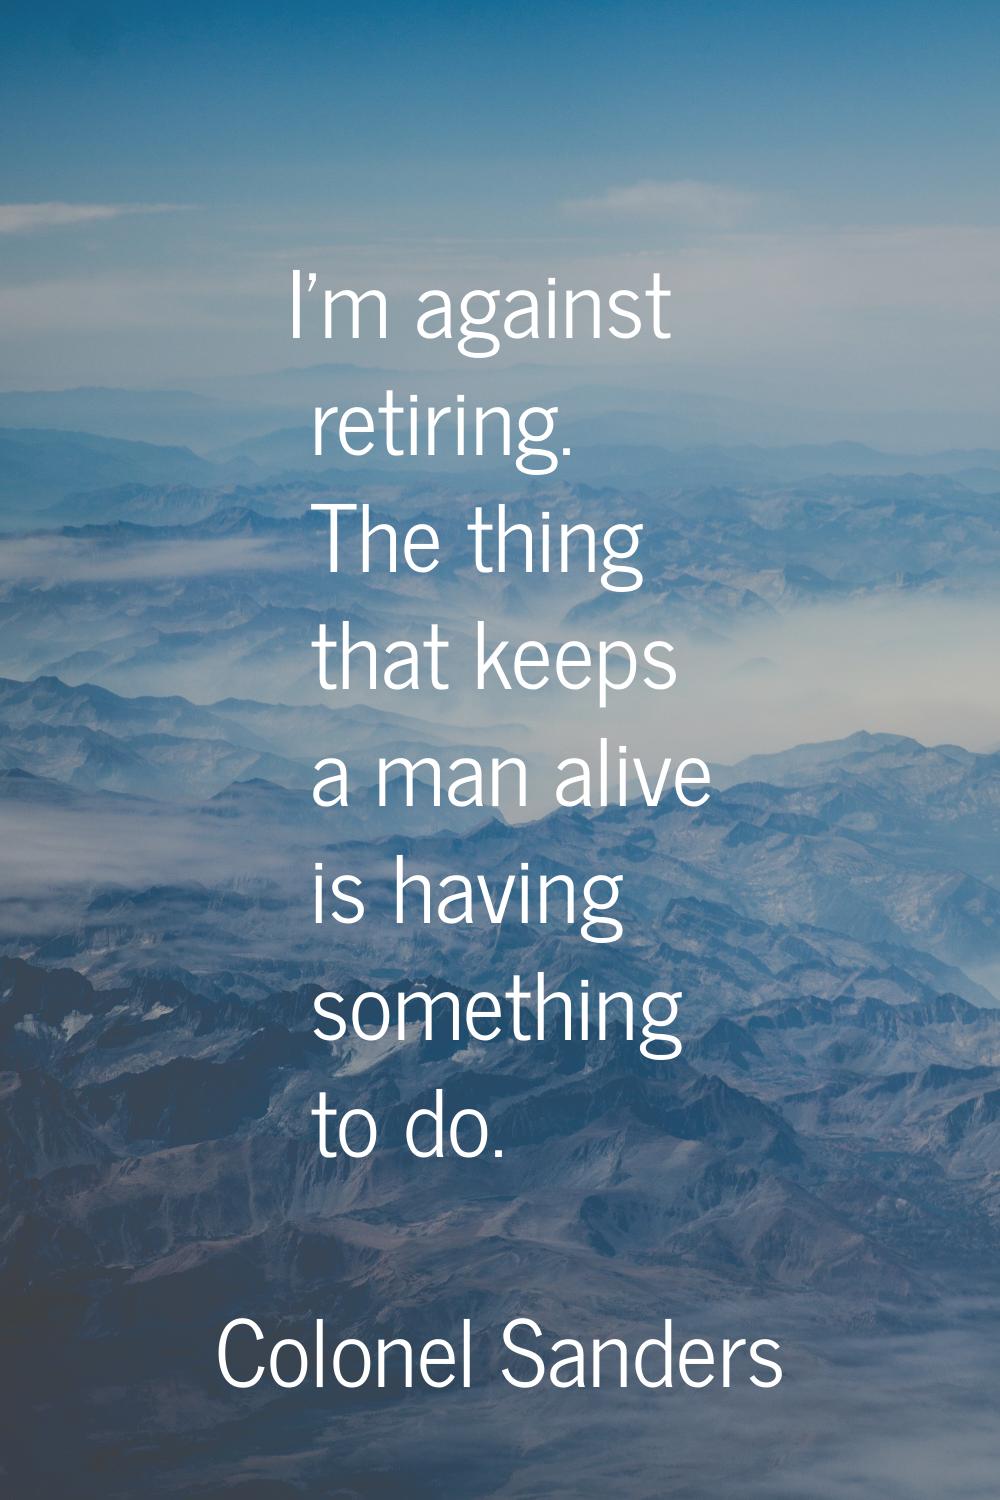 I'm against retiring. The thing that keeps a man alive is having something to do.